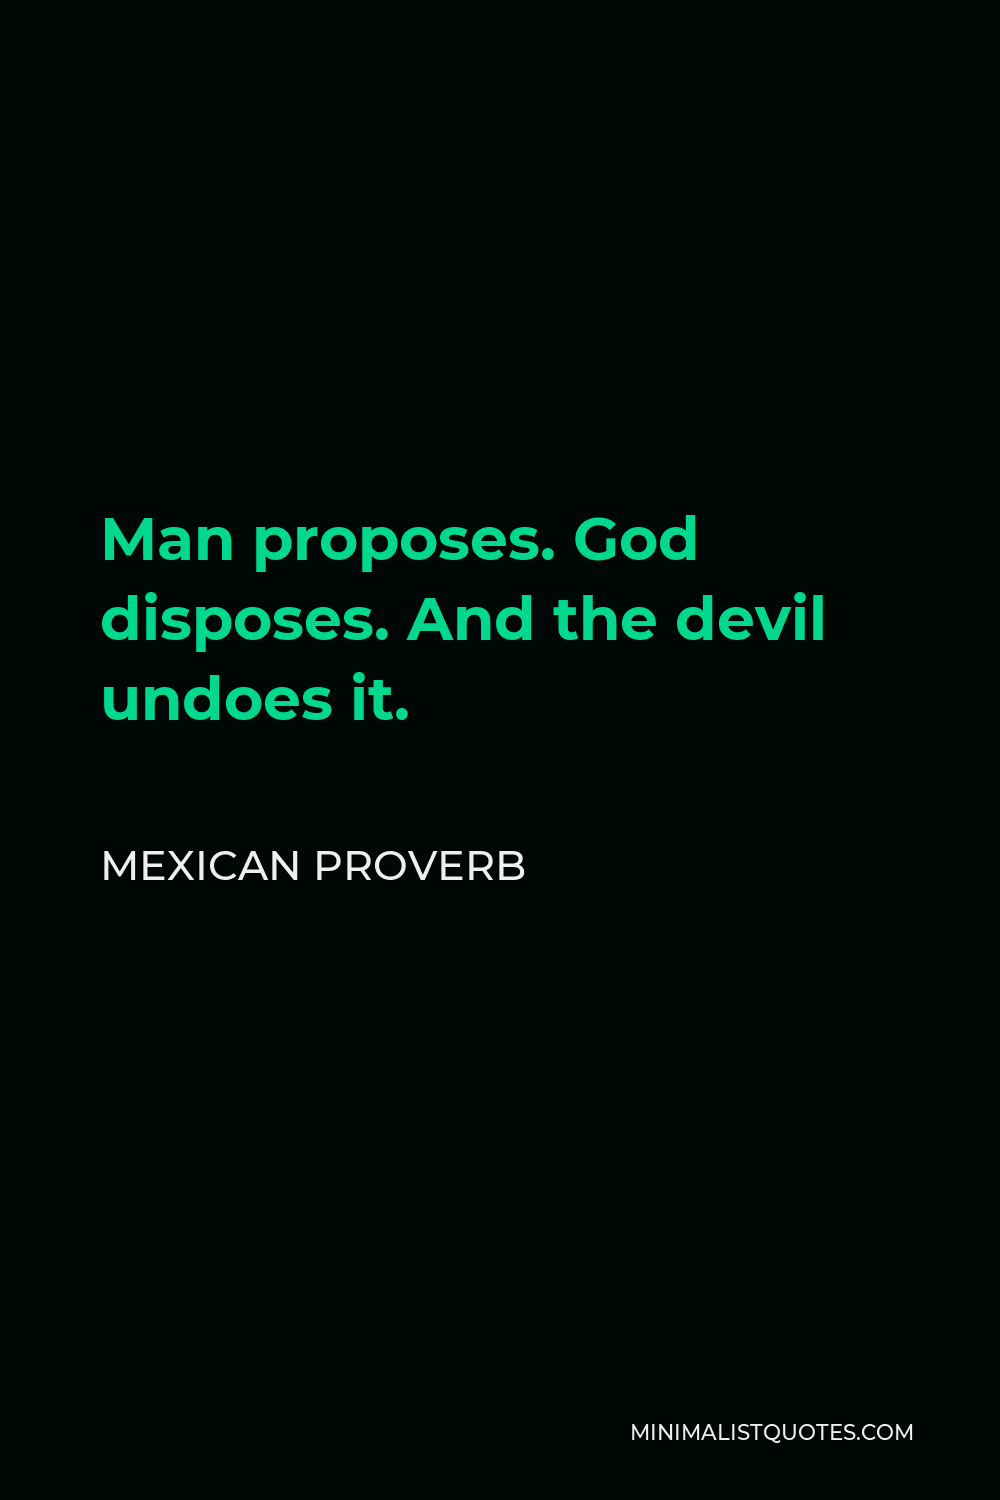 Mexican Proverb Quote - Man proposes. God disposes. And the devil undoes it.